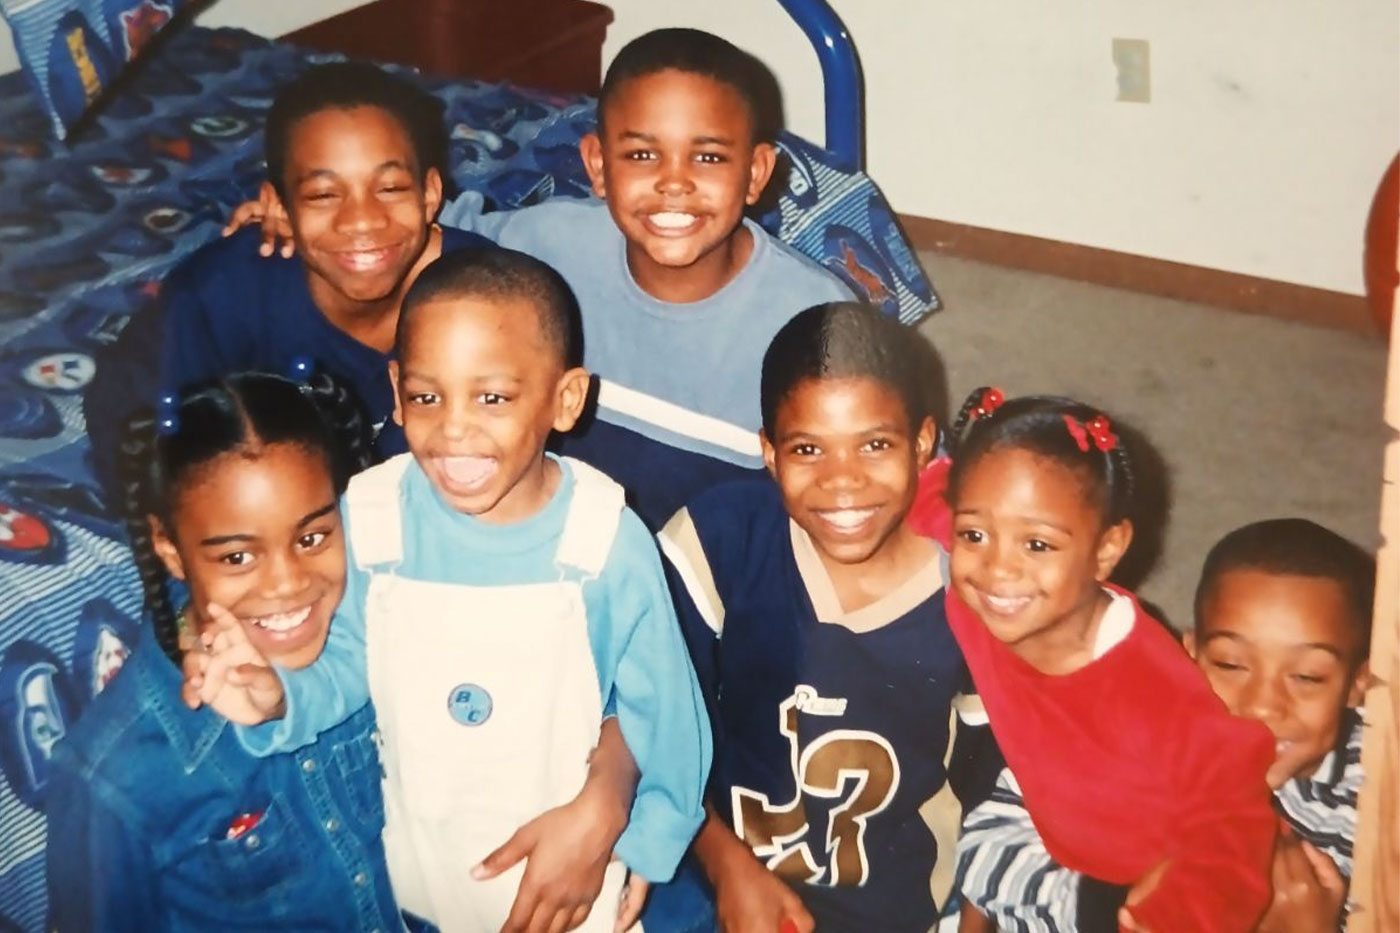 Donte' (in back) with his cousins